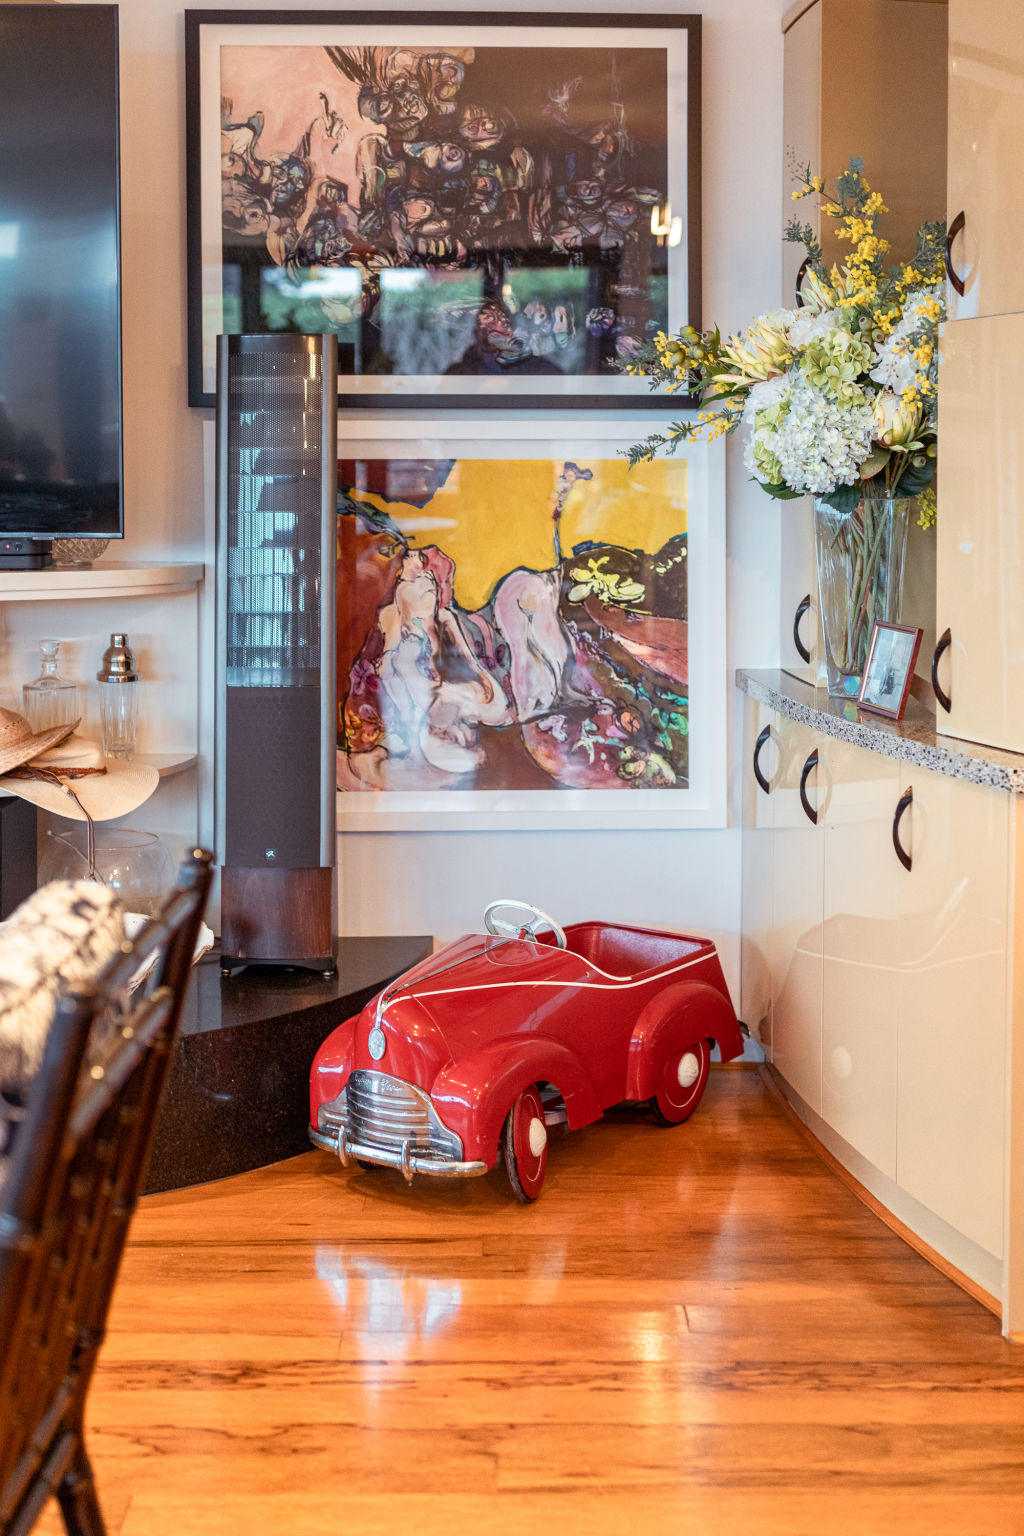 There are elements of her childhood peppered throughout the home.  Photo: Greg Briggs